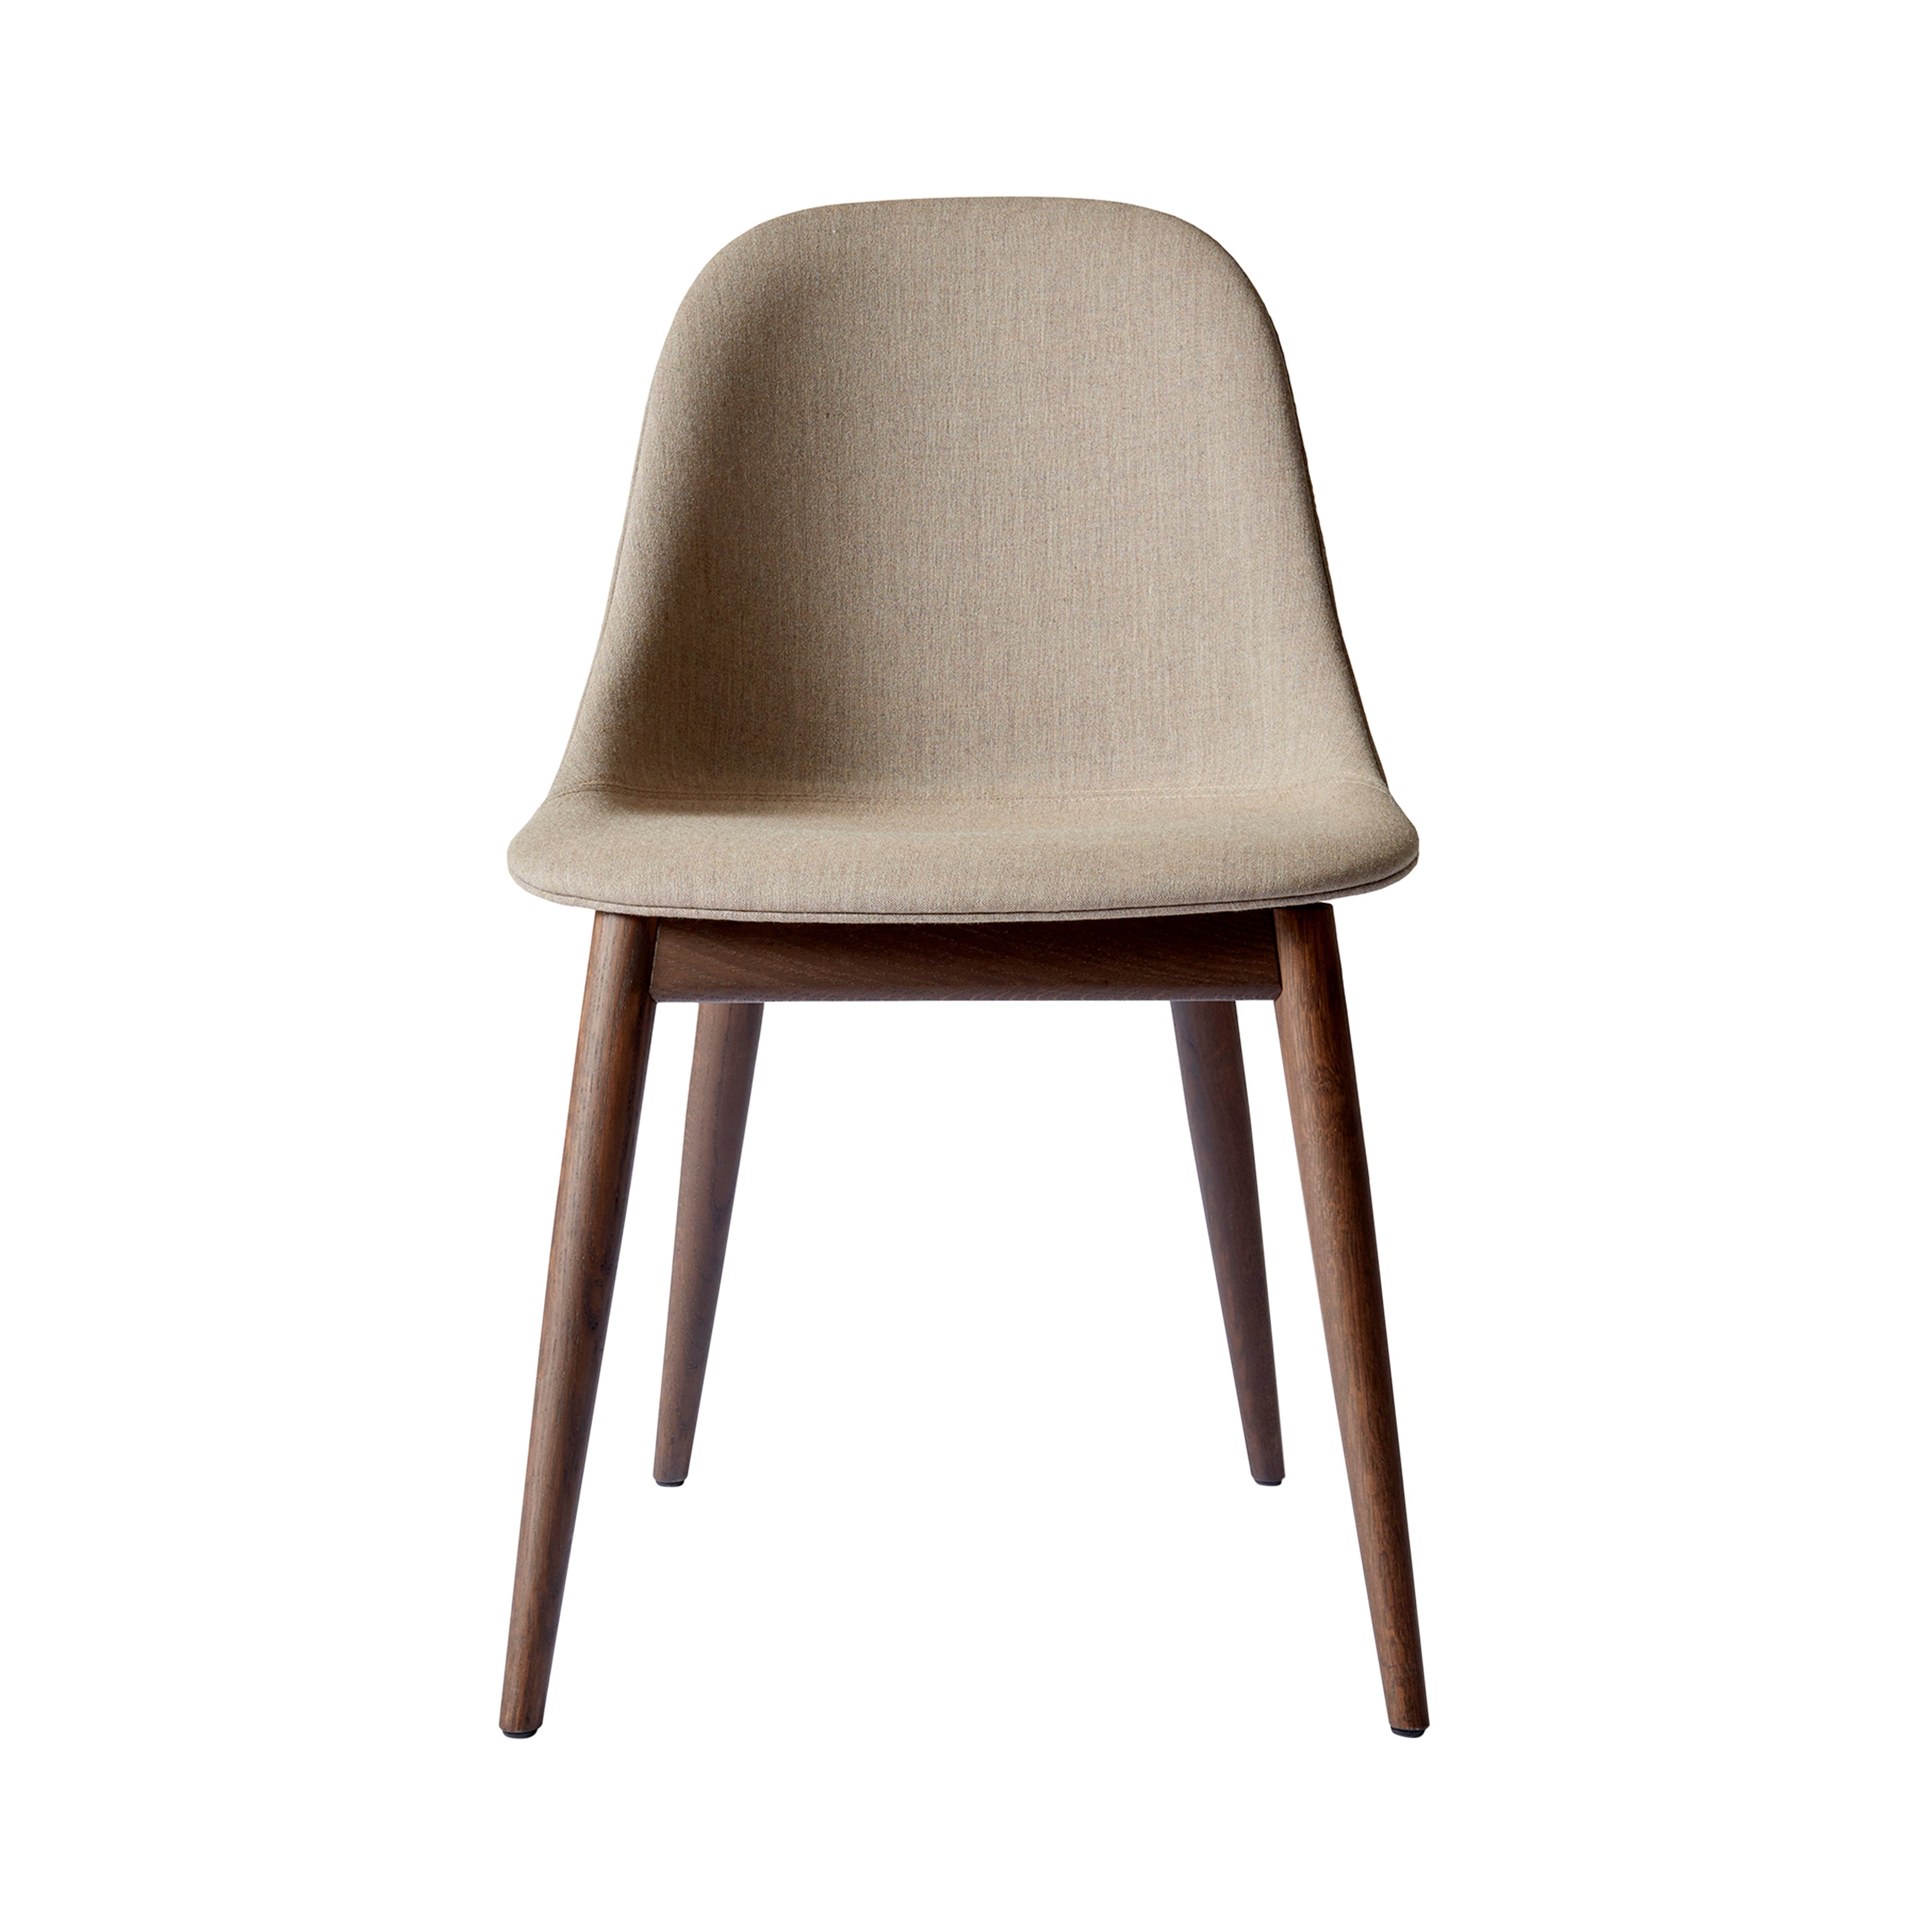 Harbour Side Chair: Wood Base Upholstered + Dark Stained Oak + Remix3 233